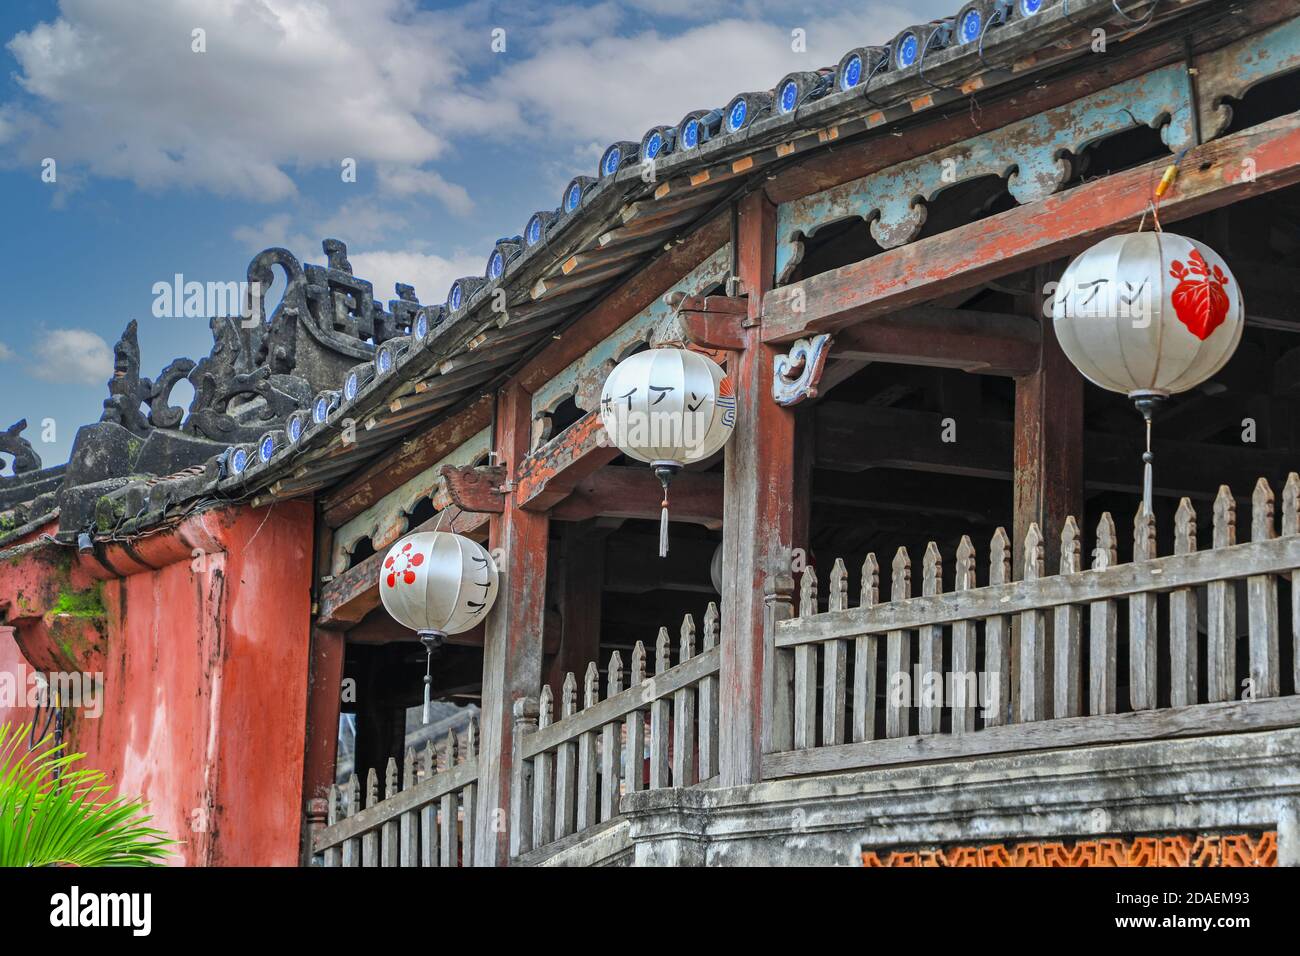 Lanterns hanging from the Japanese covered bridge, Hoi An, Vietnam, Asia Stock Photo